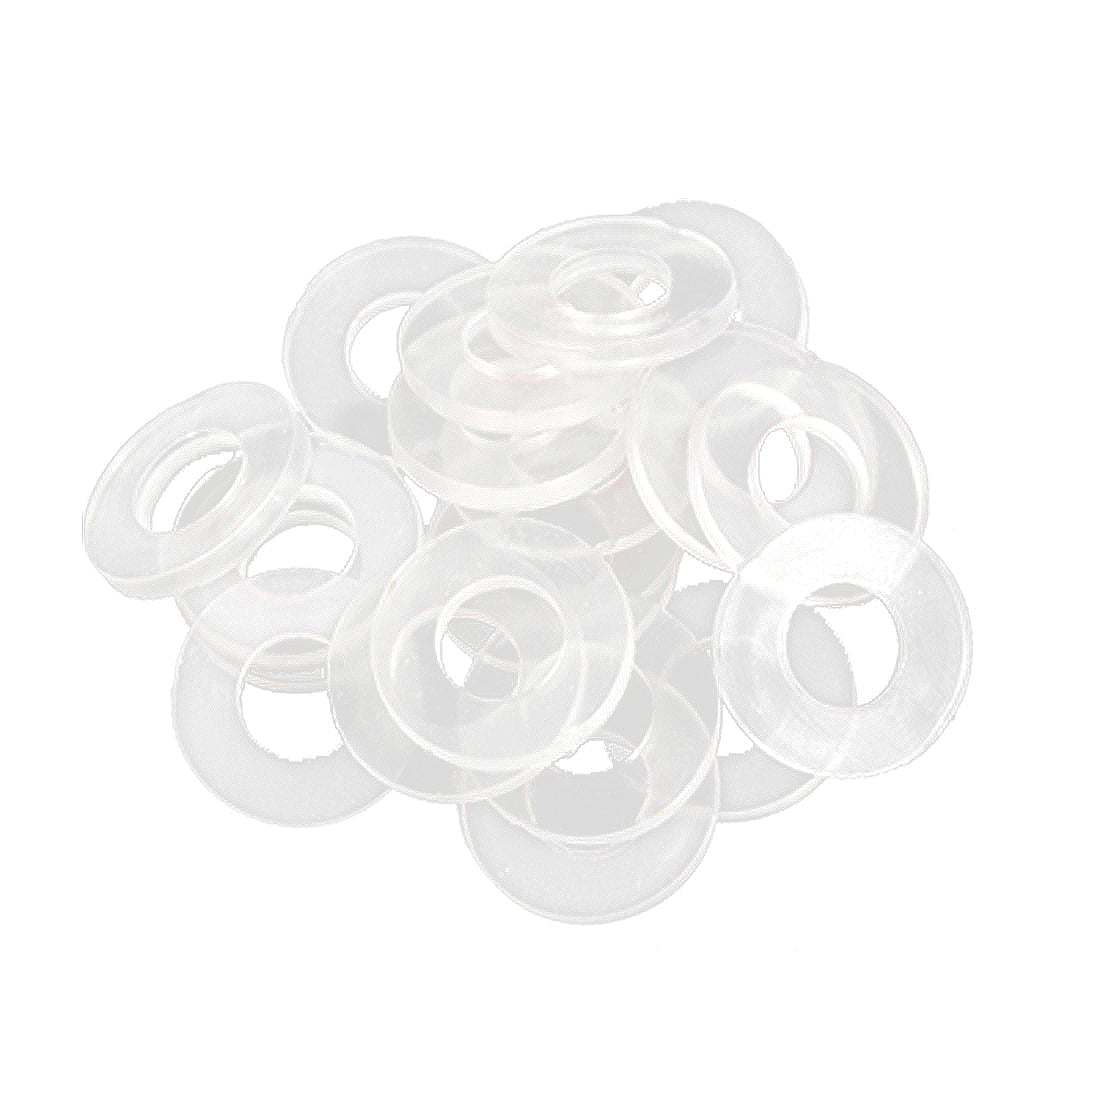 uxcell Uxcell 19mm OD 8.5mm ID mm Thickness Rubber Washer Gasket Seal Rings, Clear, Pack of 20